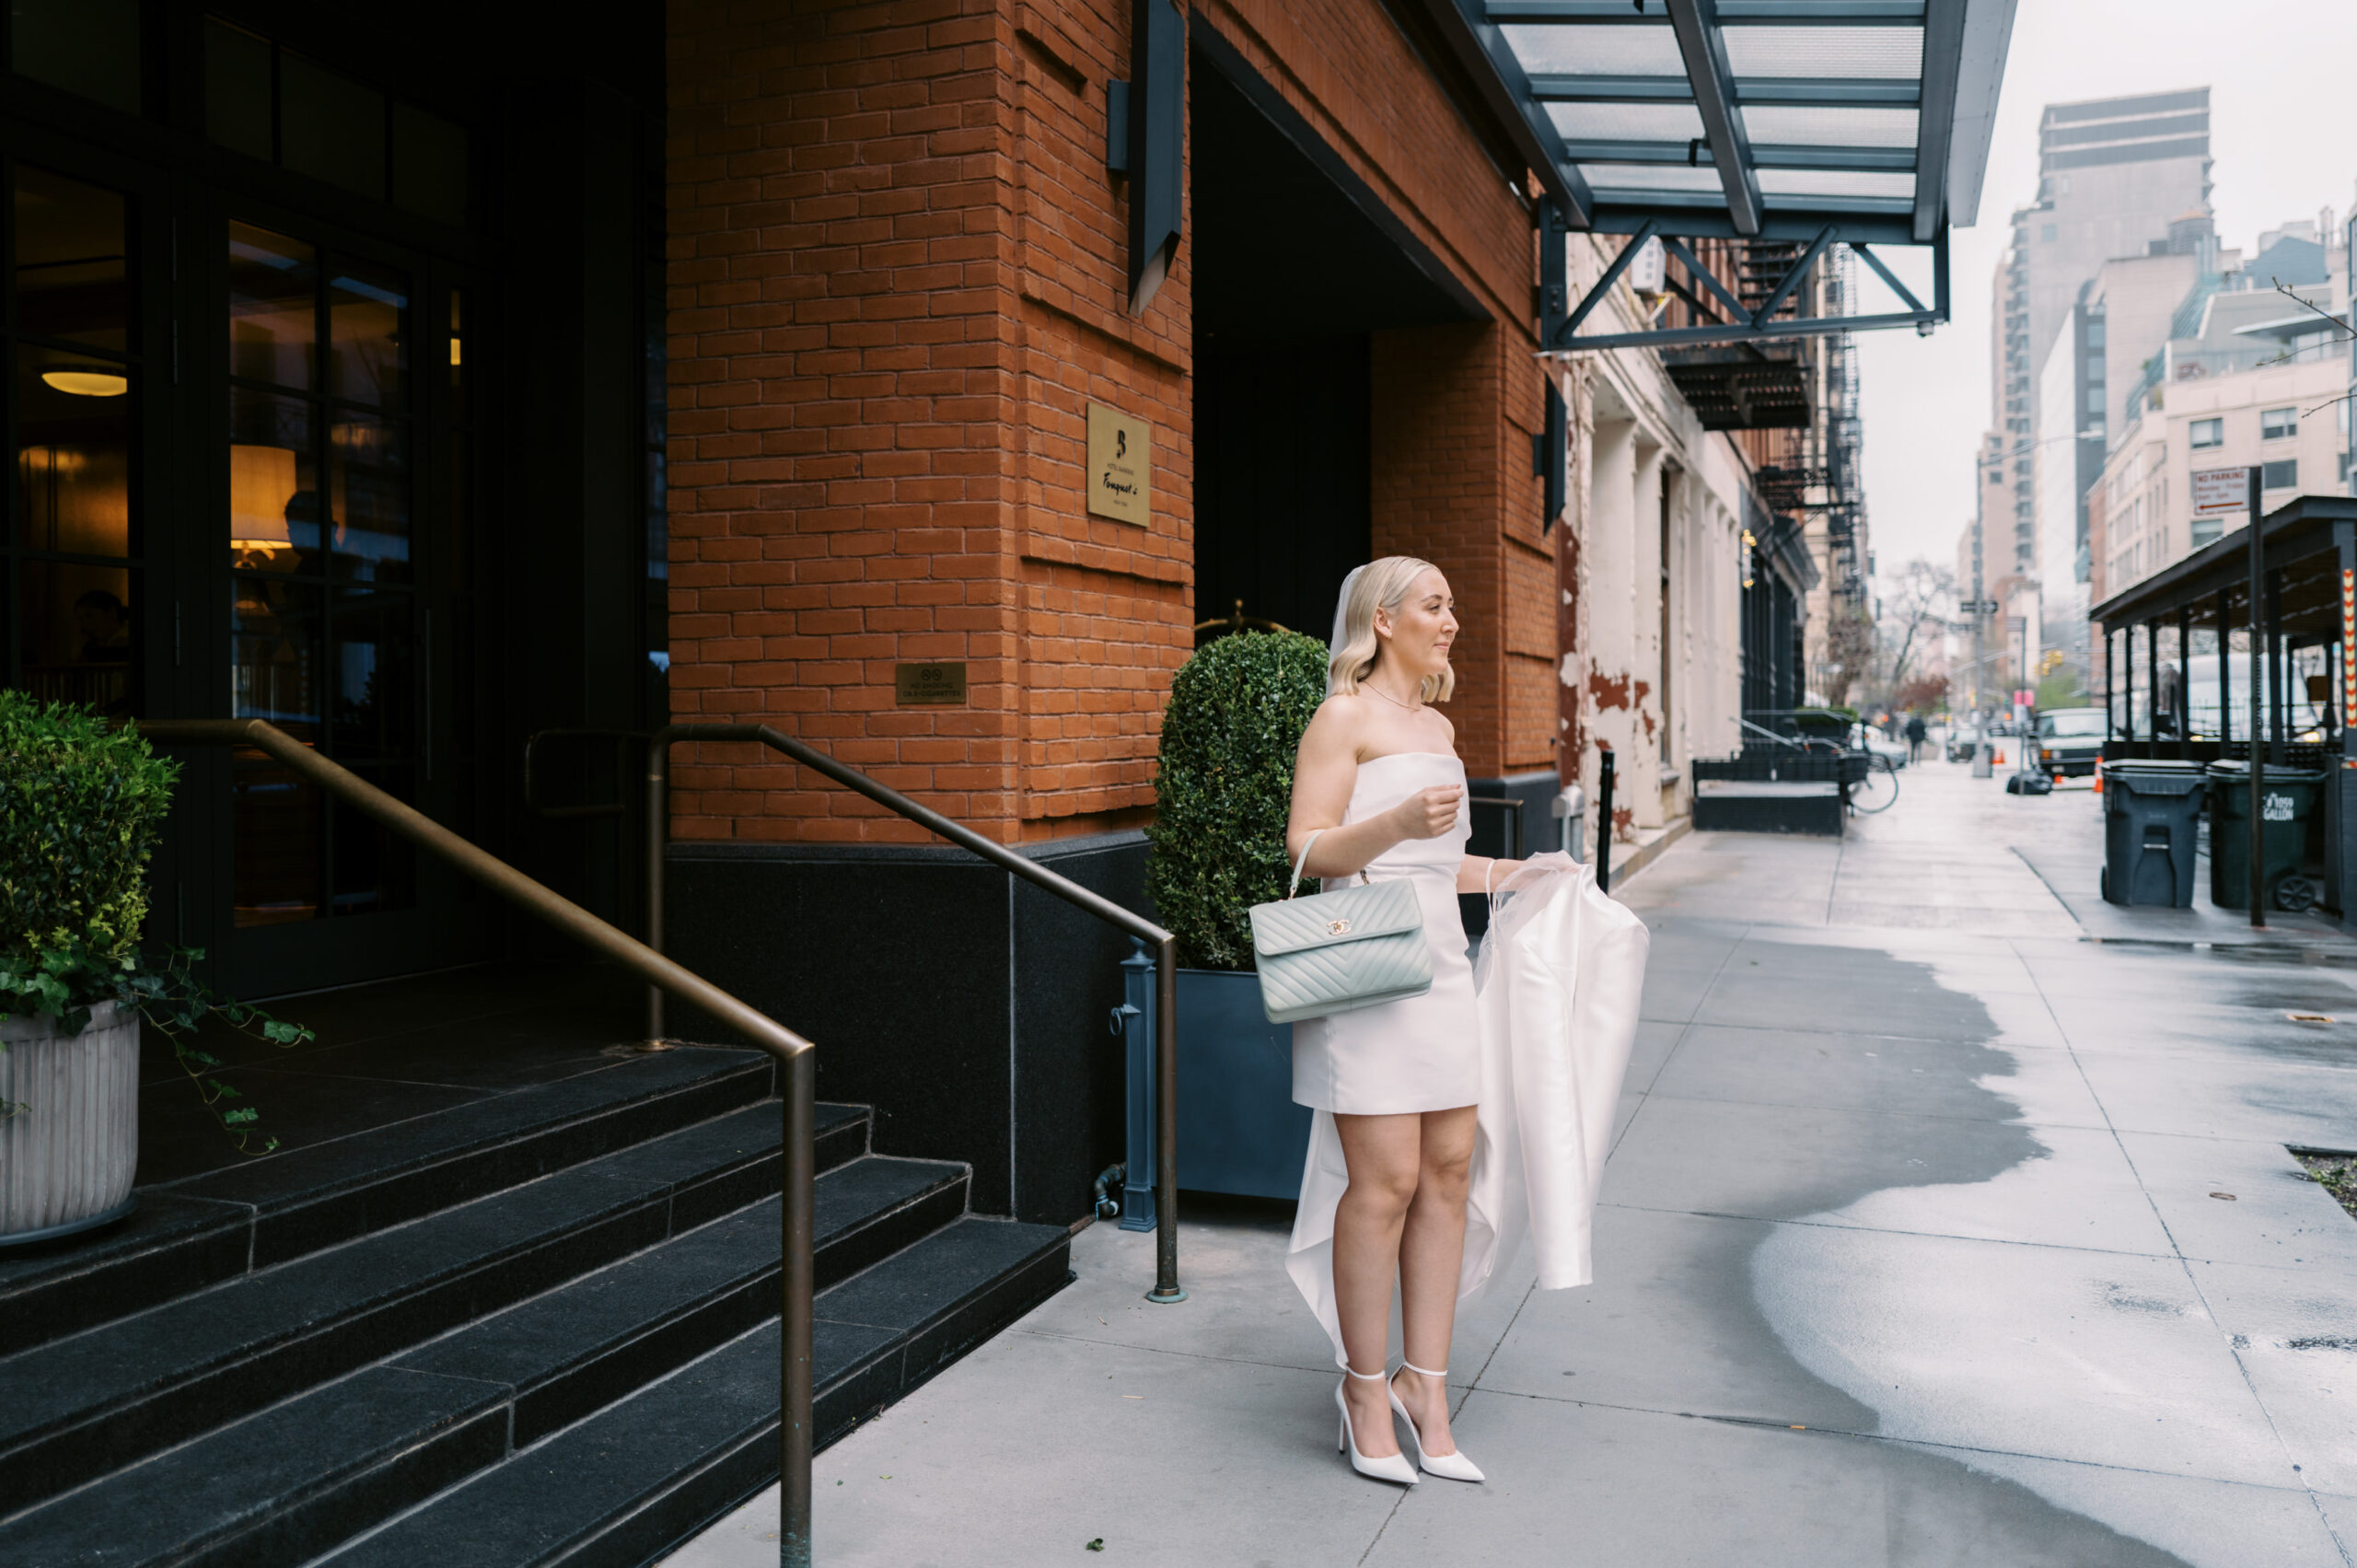 The bride is waiting outside the hotel for her groom. Candid wedding photography image by Jenny Fu Studio